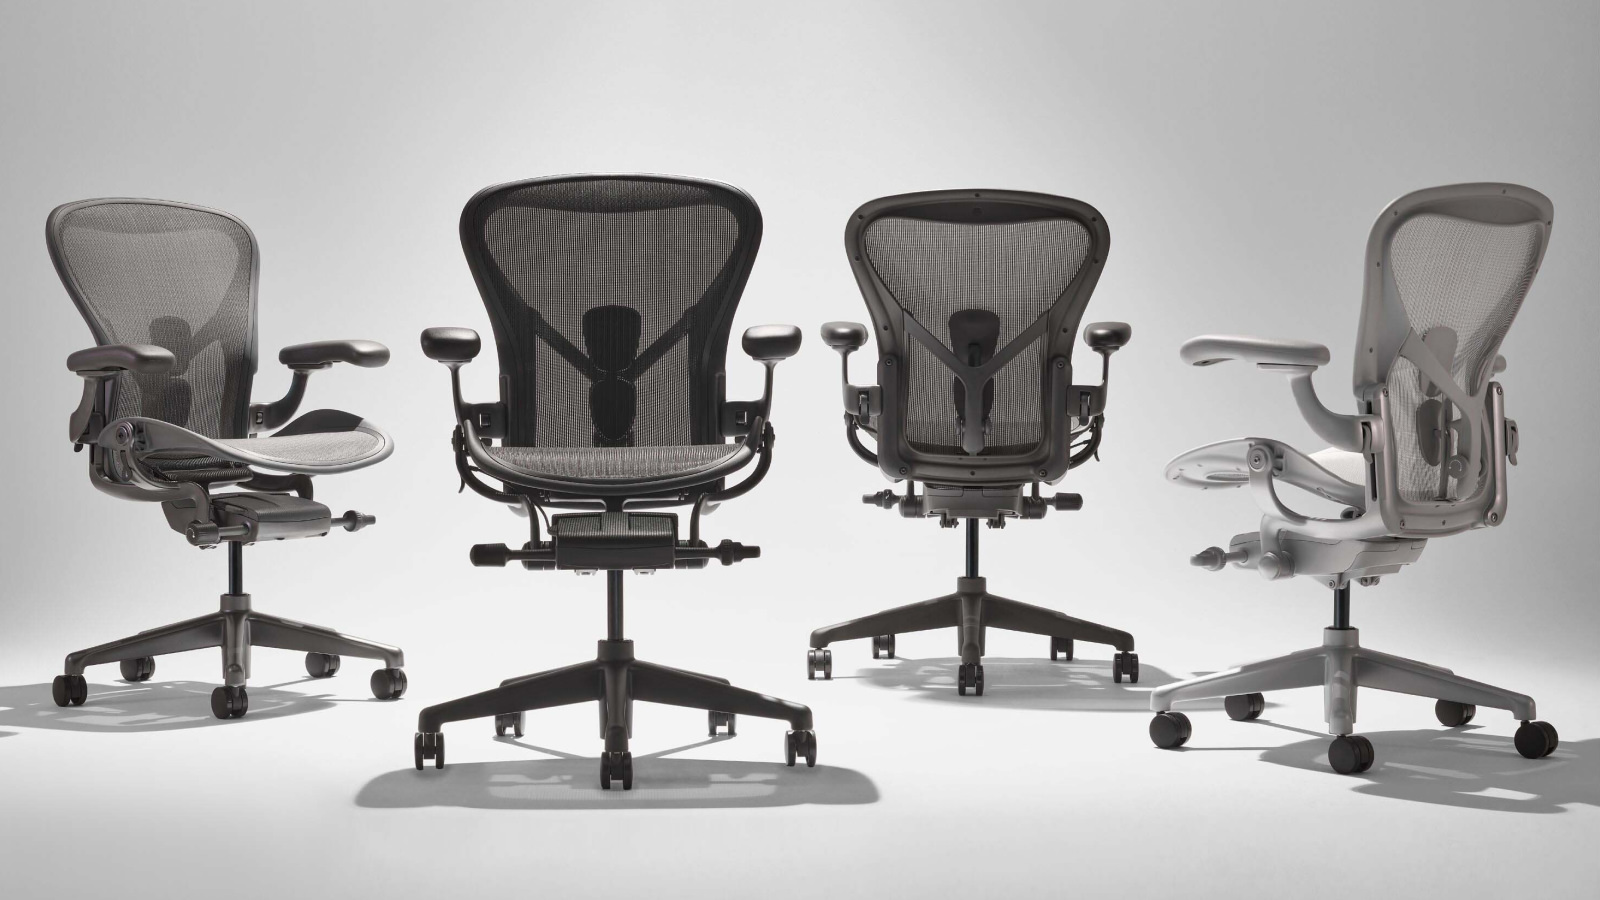 Four Aeron Chairs in four different colors.